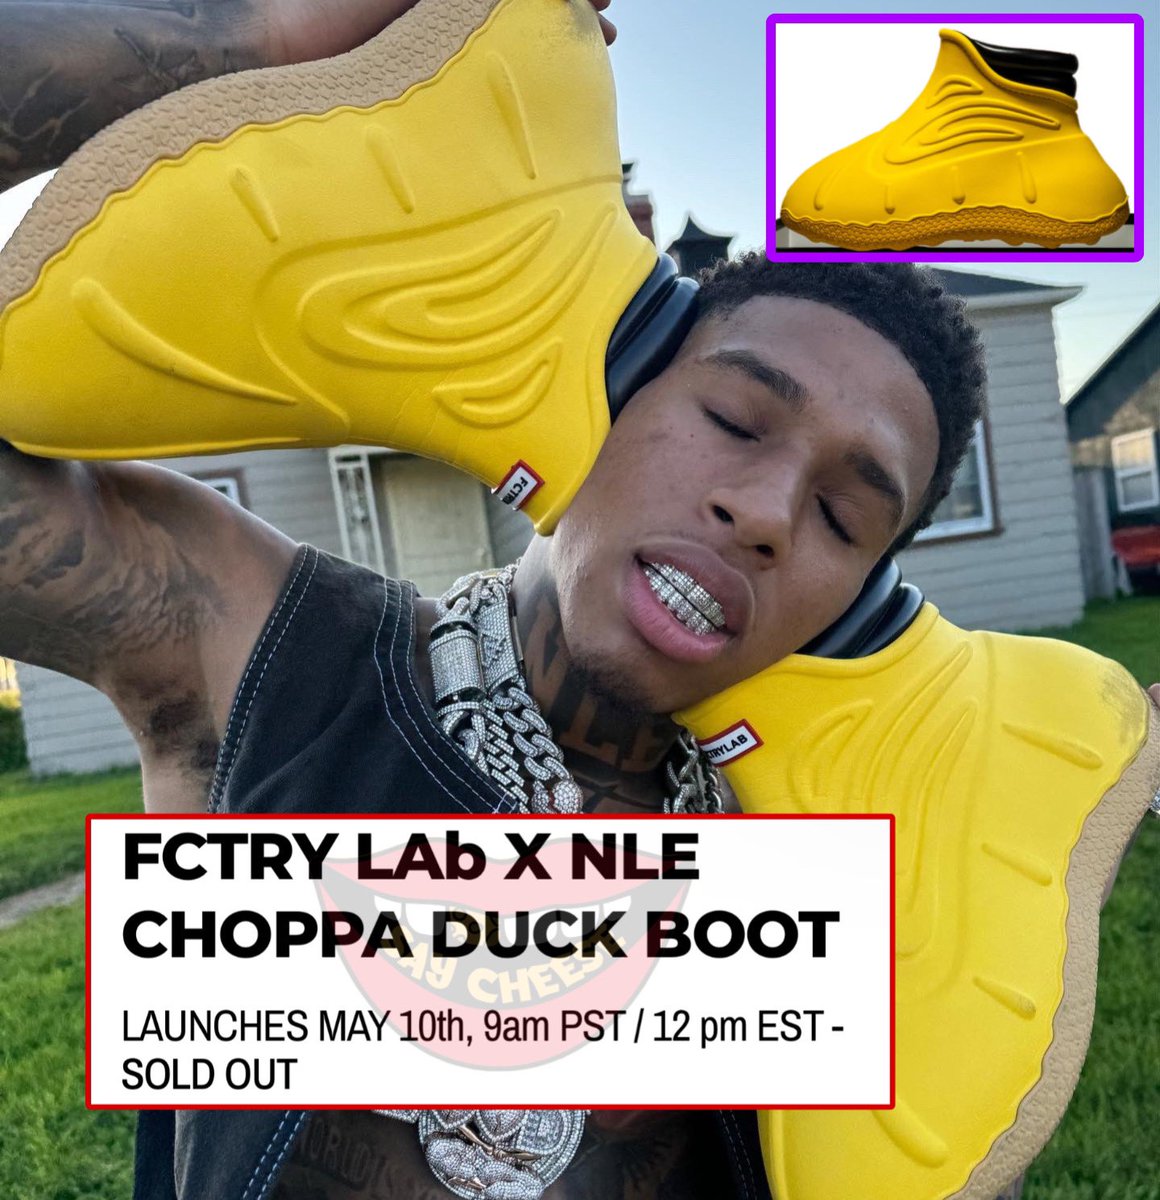 NLE Choppa's ‘Duck’ boots have sold out